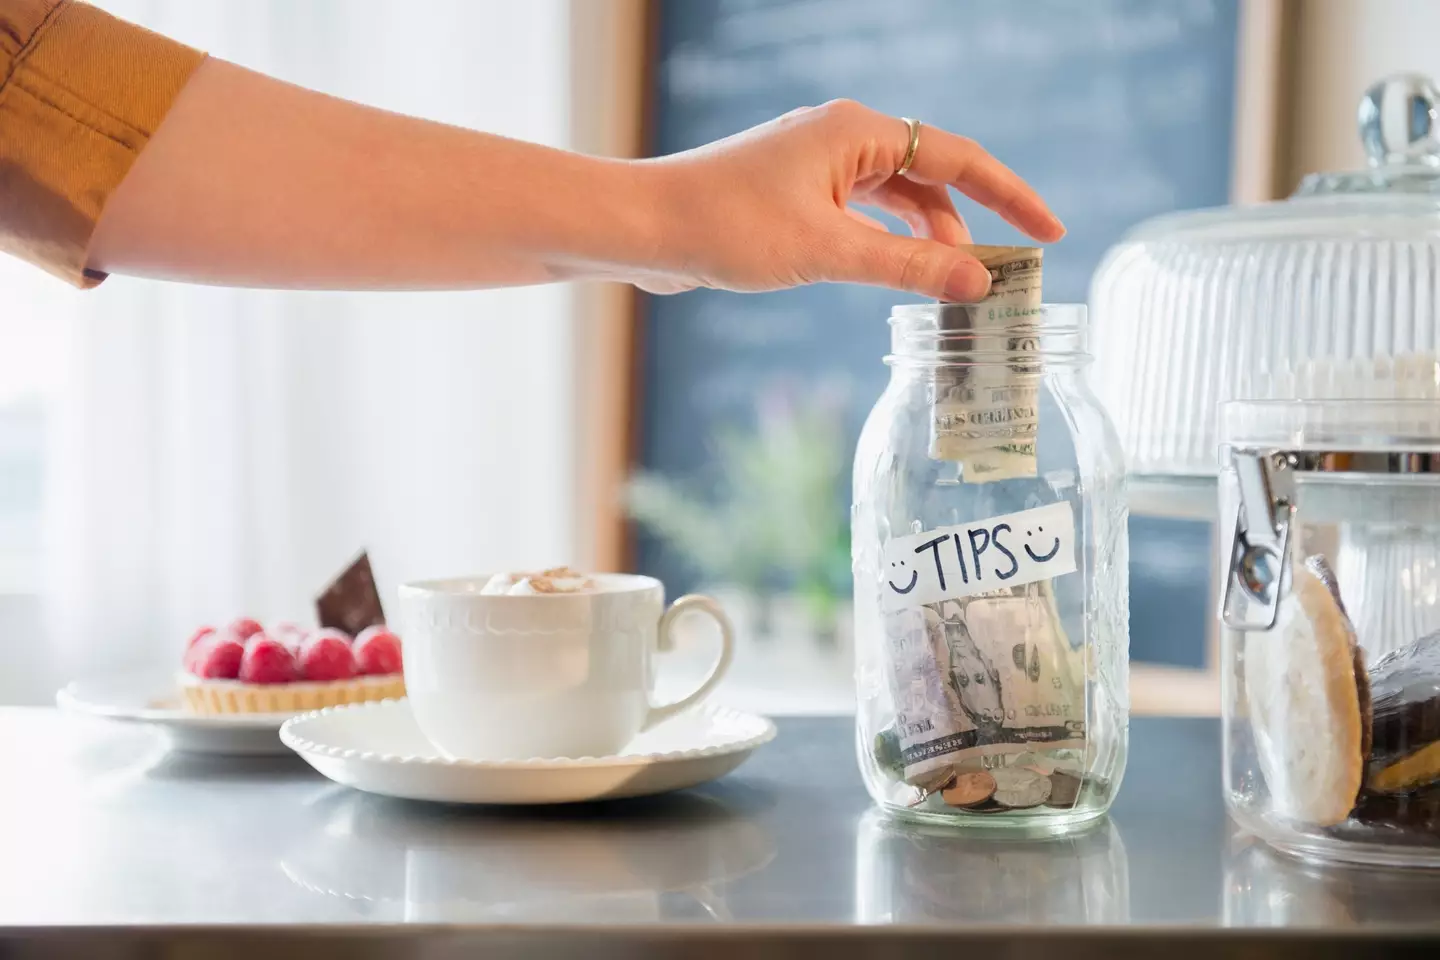 Tip jars are commonplace in some places around the world (Getty Stock Images)